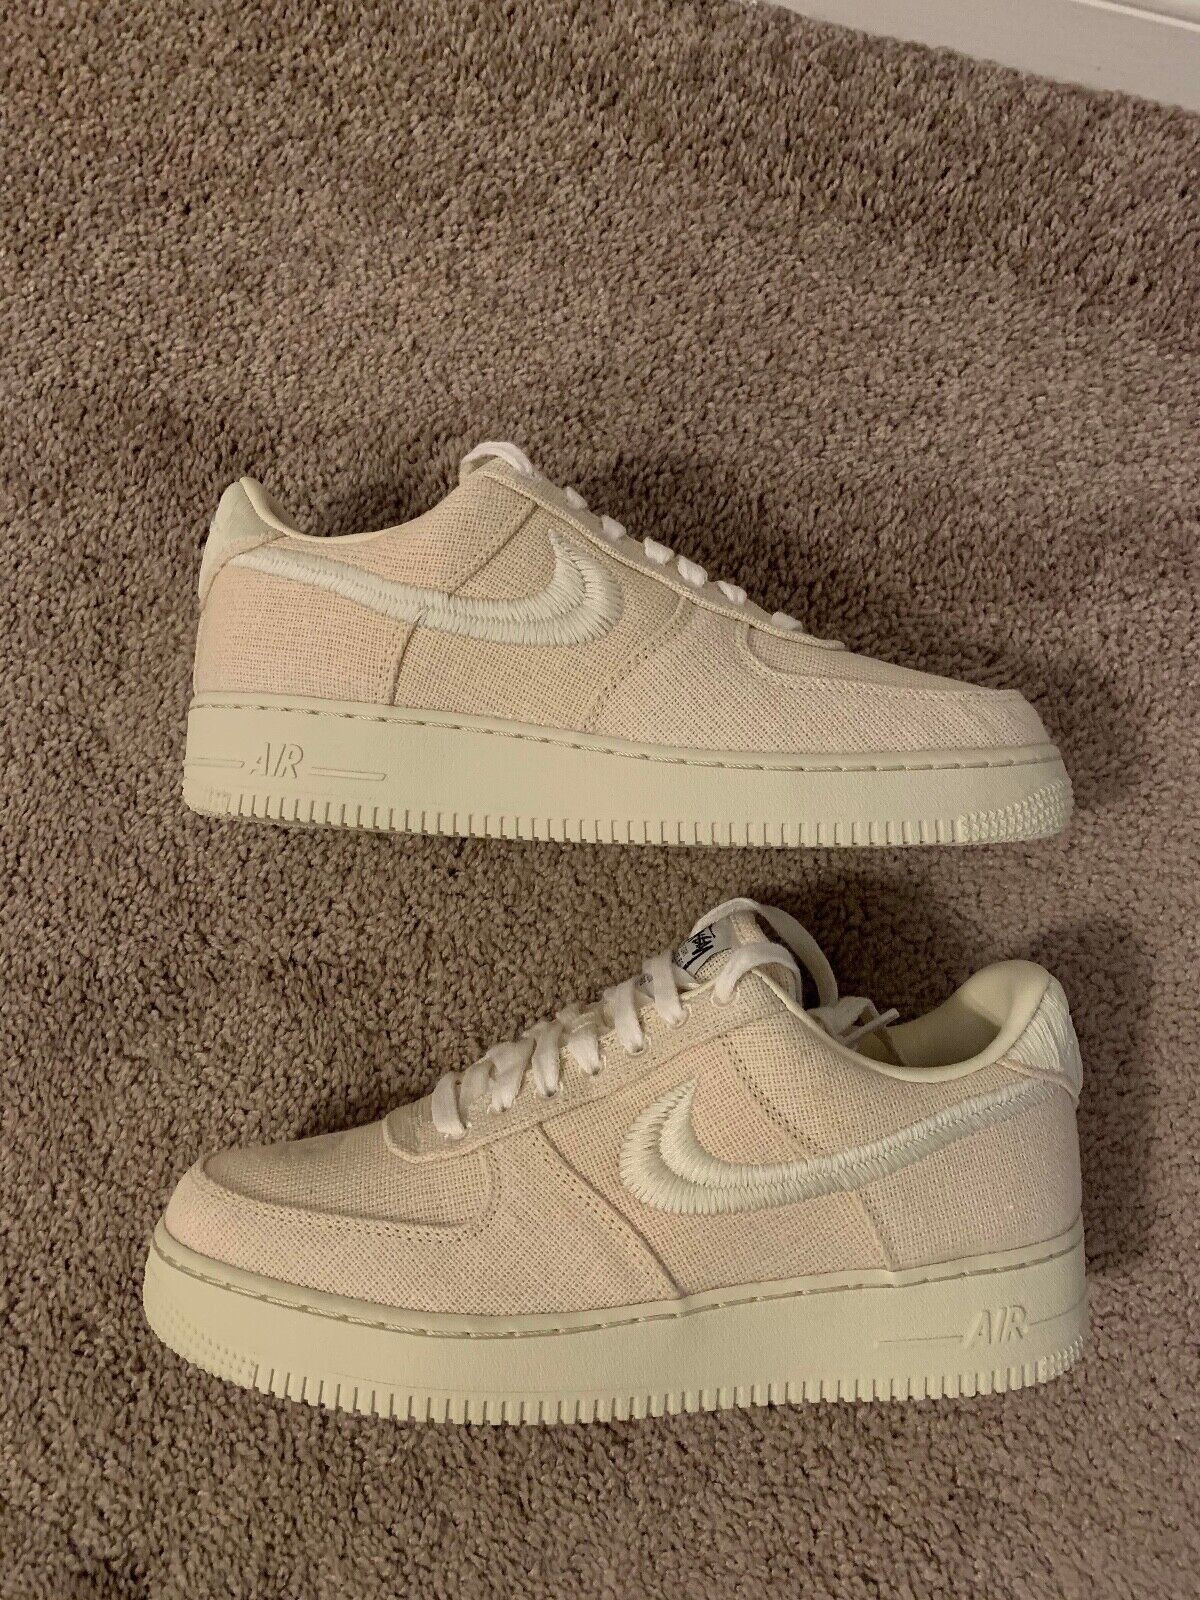 Size 8 - Nike Air Force 1 Low Stussy Fossil for sale online | eBay